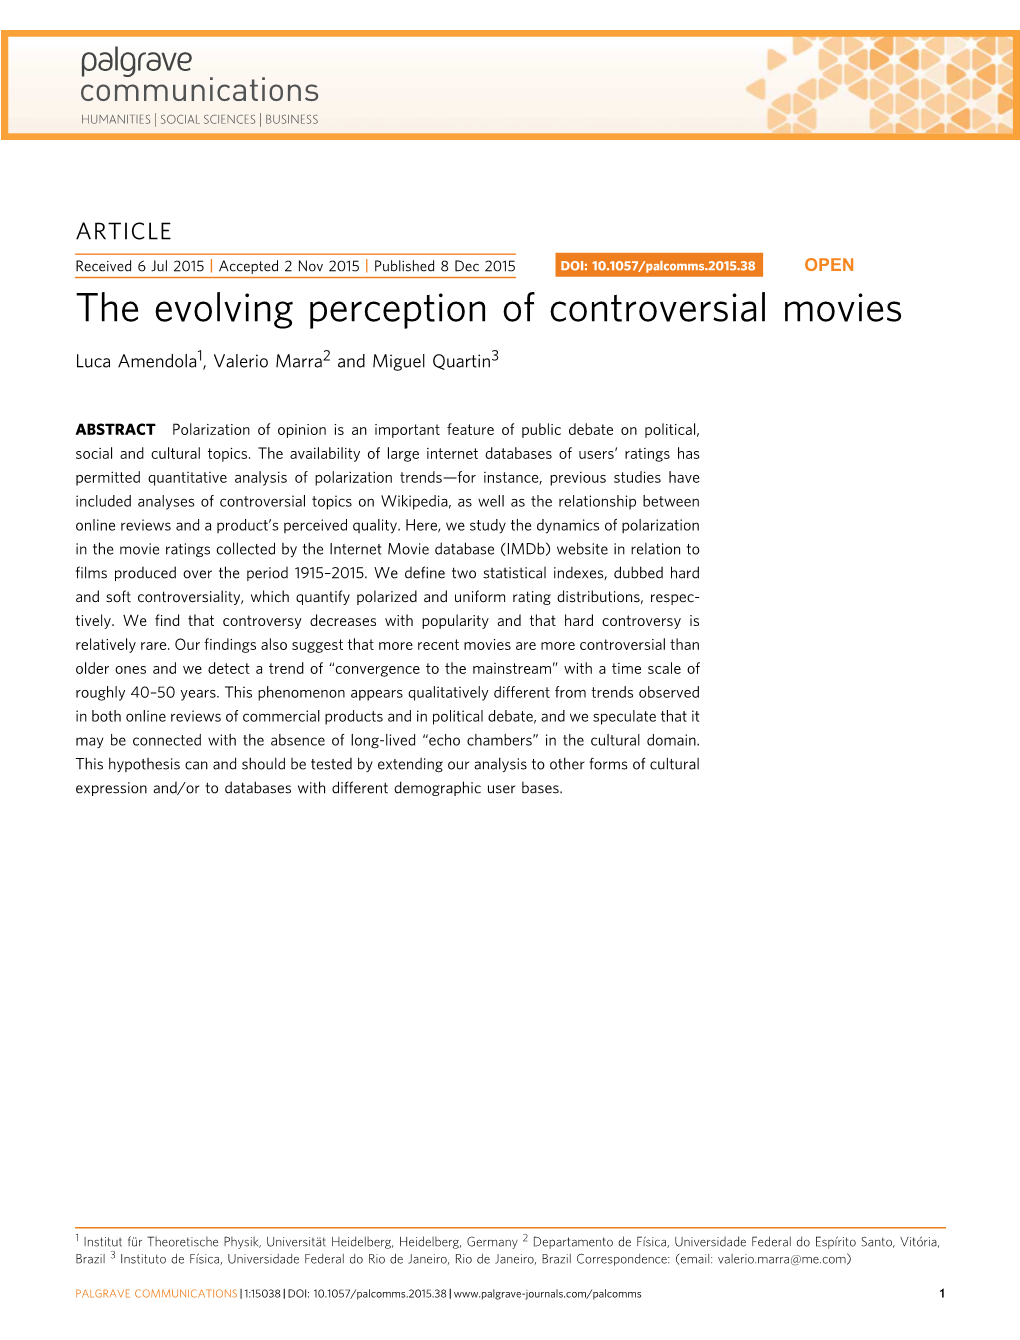 The Evolving Perception of Controversial Movies